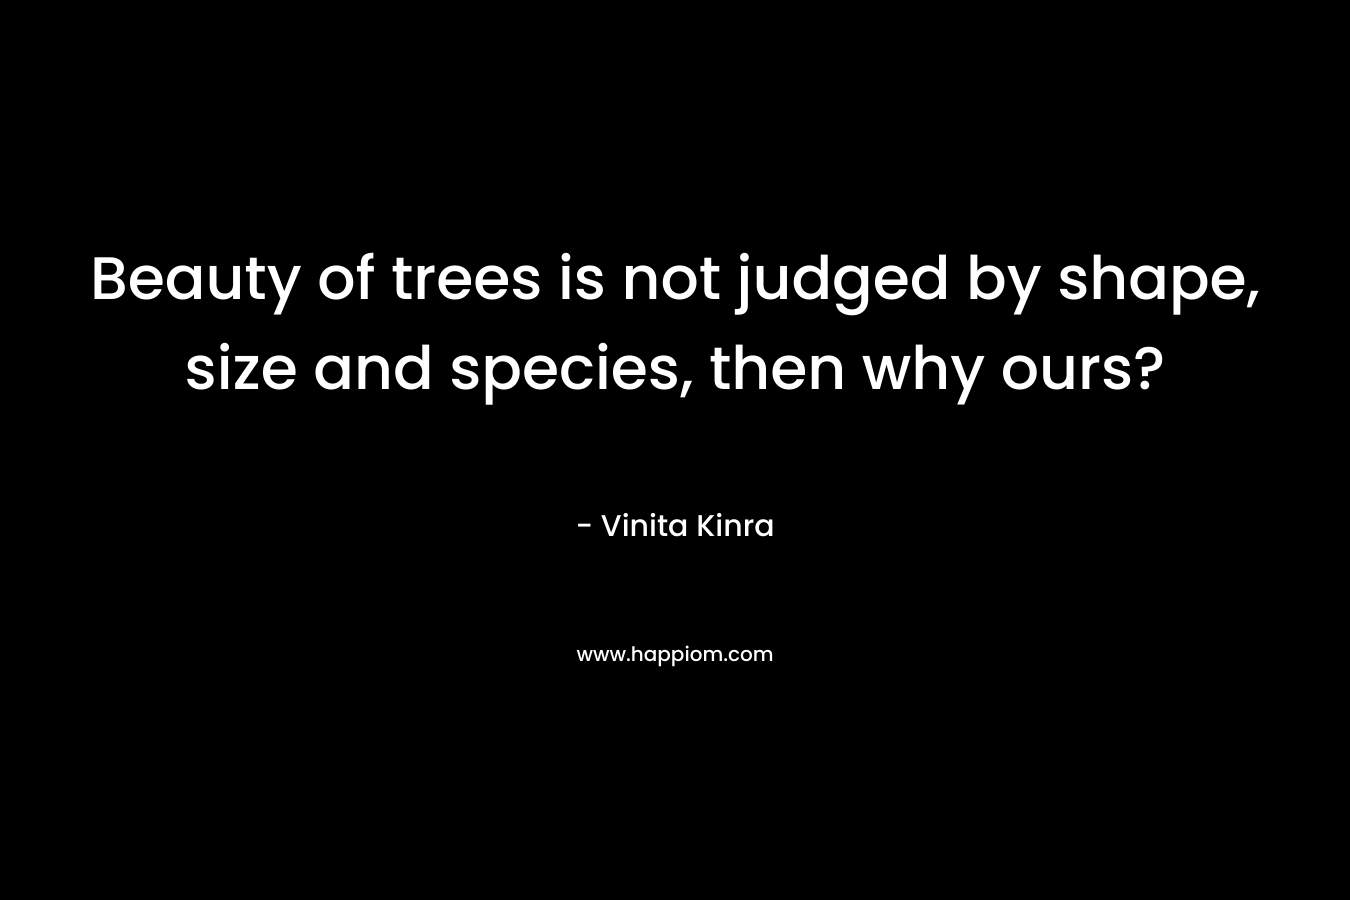 Beauty of trees is not judged by shape, size and species, then why ours? – Vinita Kinra